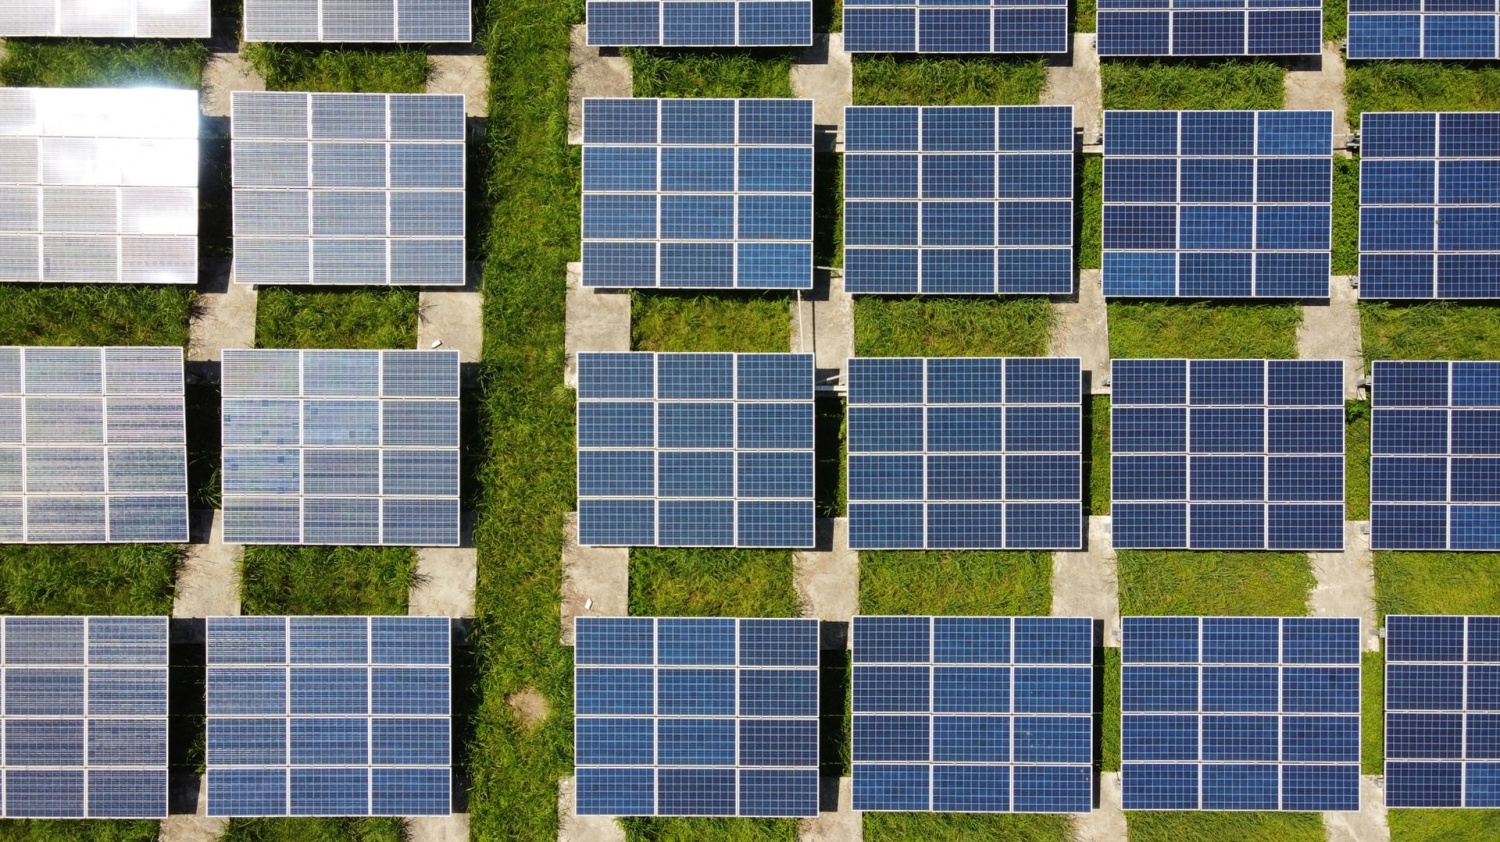 US Plans to Scale Solar and Battery Storage Capacity to 60%